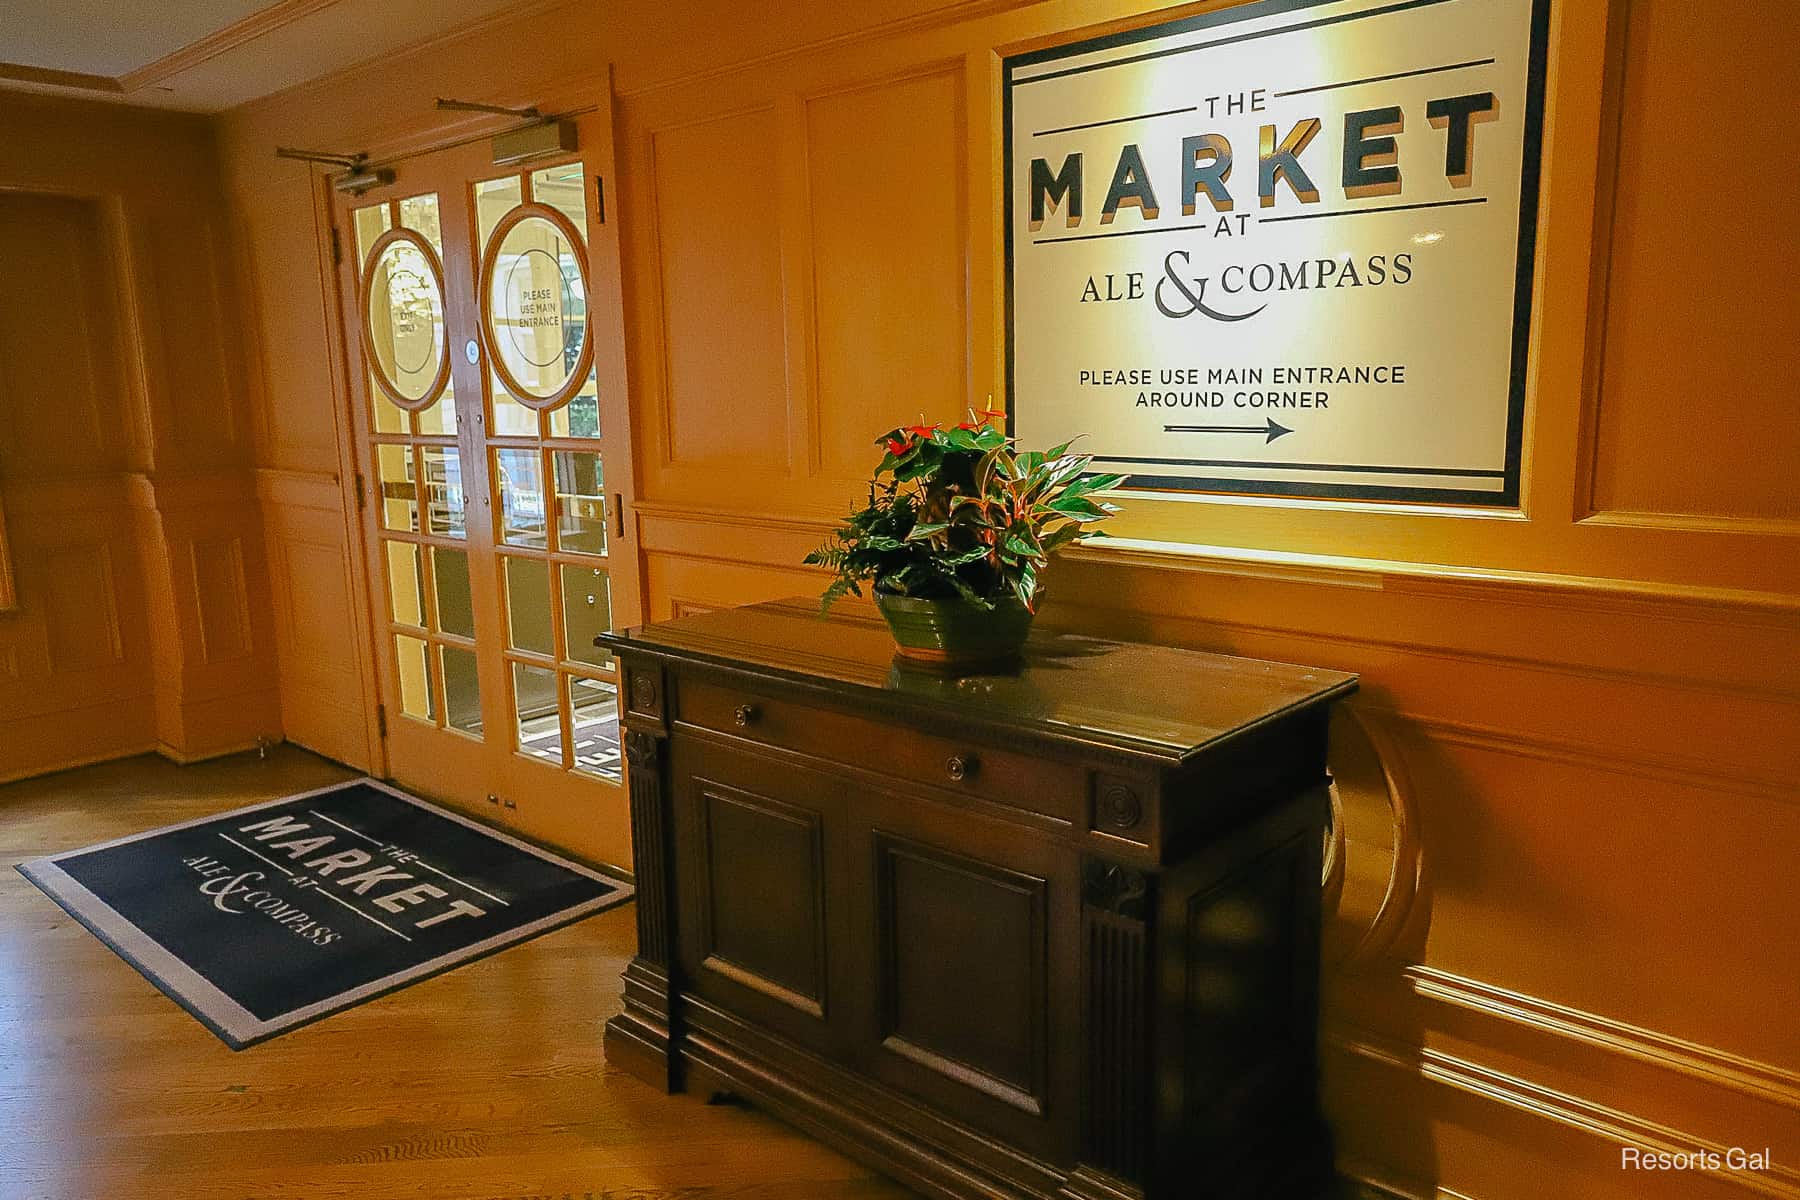 entrance to the Market at Ale and Compass with signage